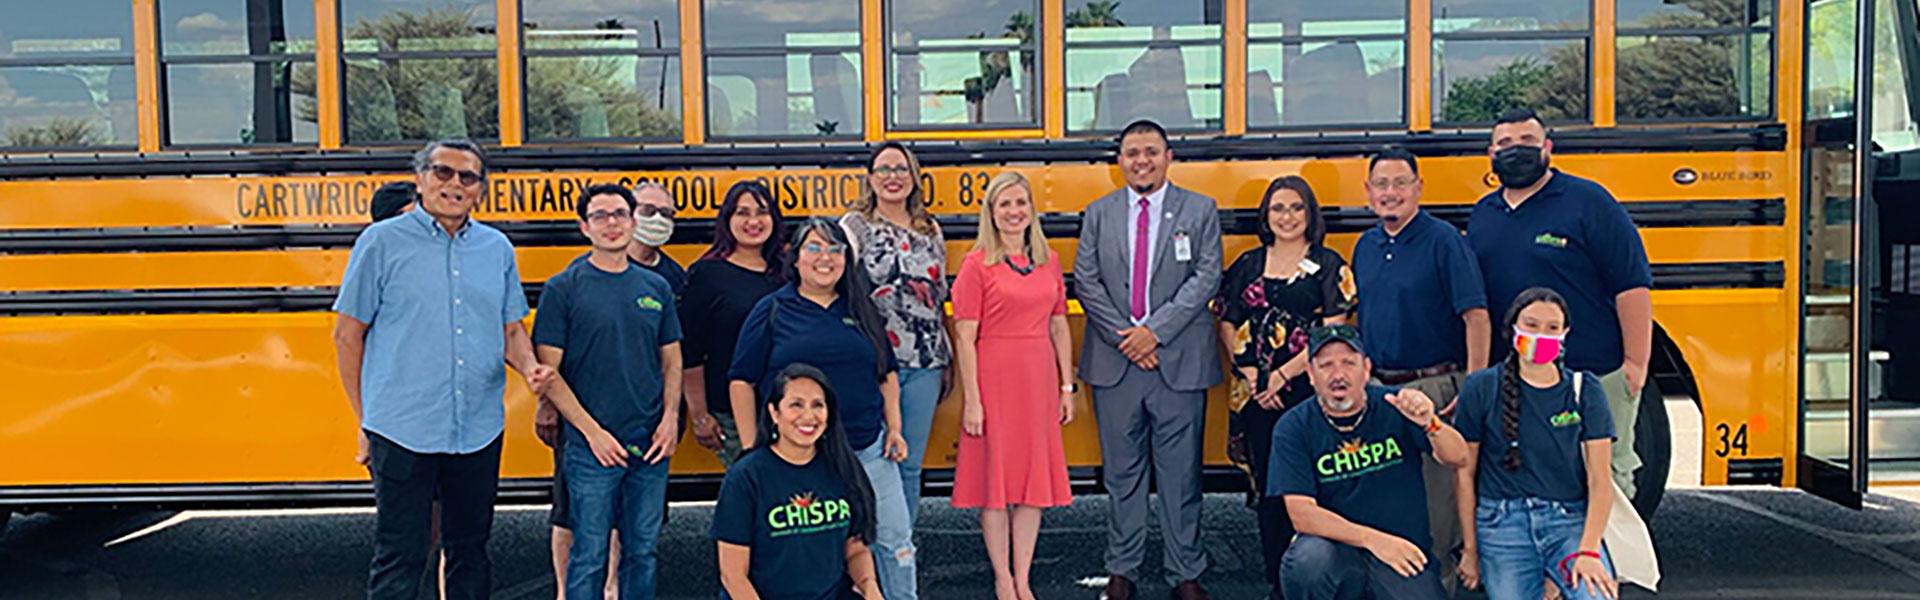 Phoenix Mayor Kate Gallego joined officials of the Cartwright School District in Maryvale and organizers with Chispa Arizona to debut the school district’s first electric bus. (Photo courtesy of 